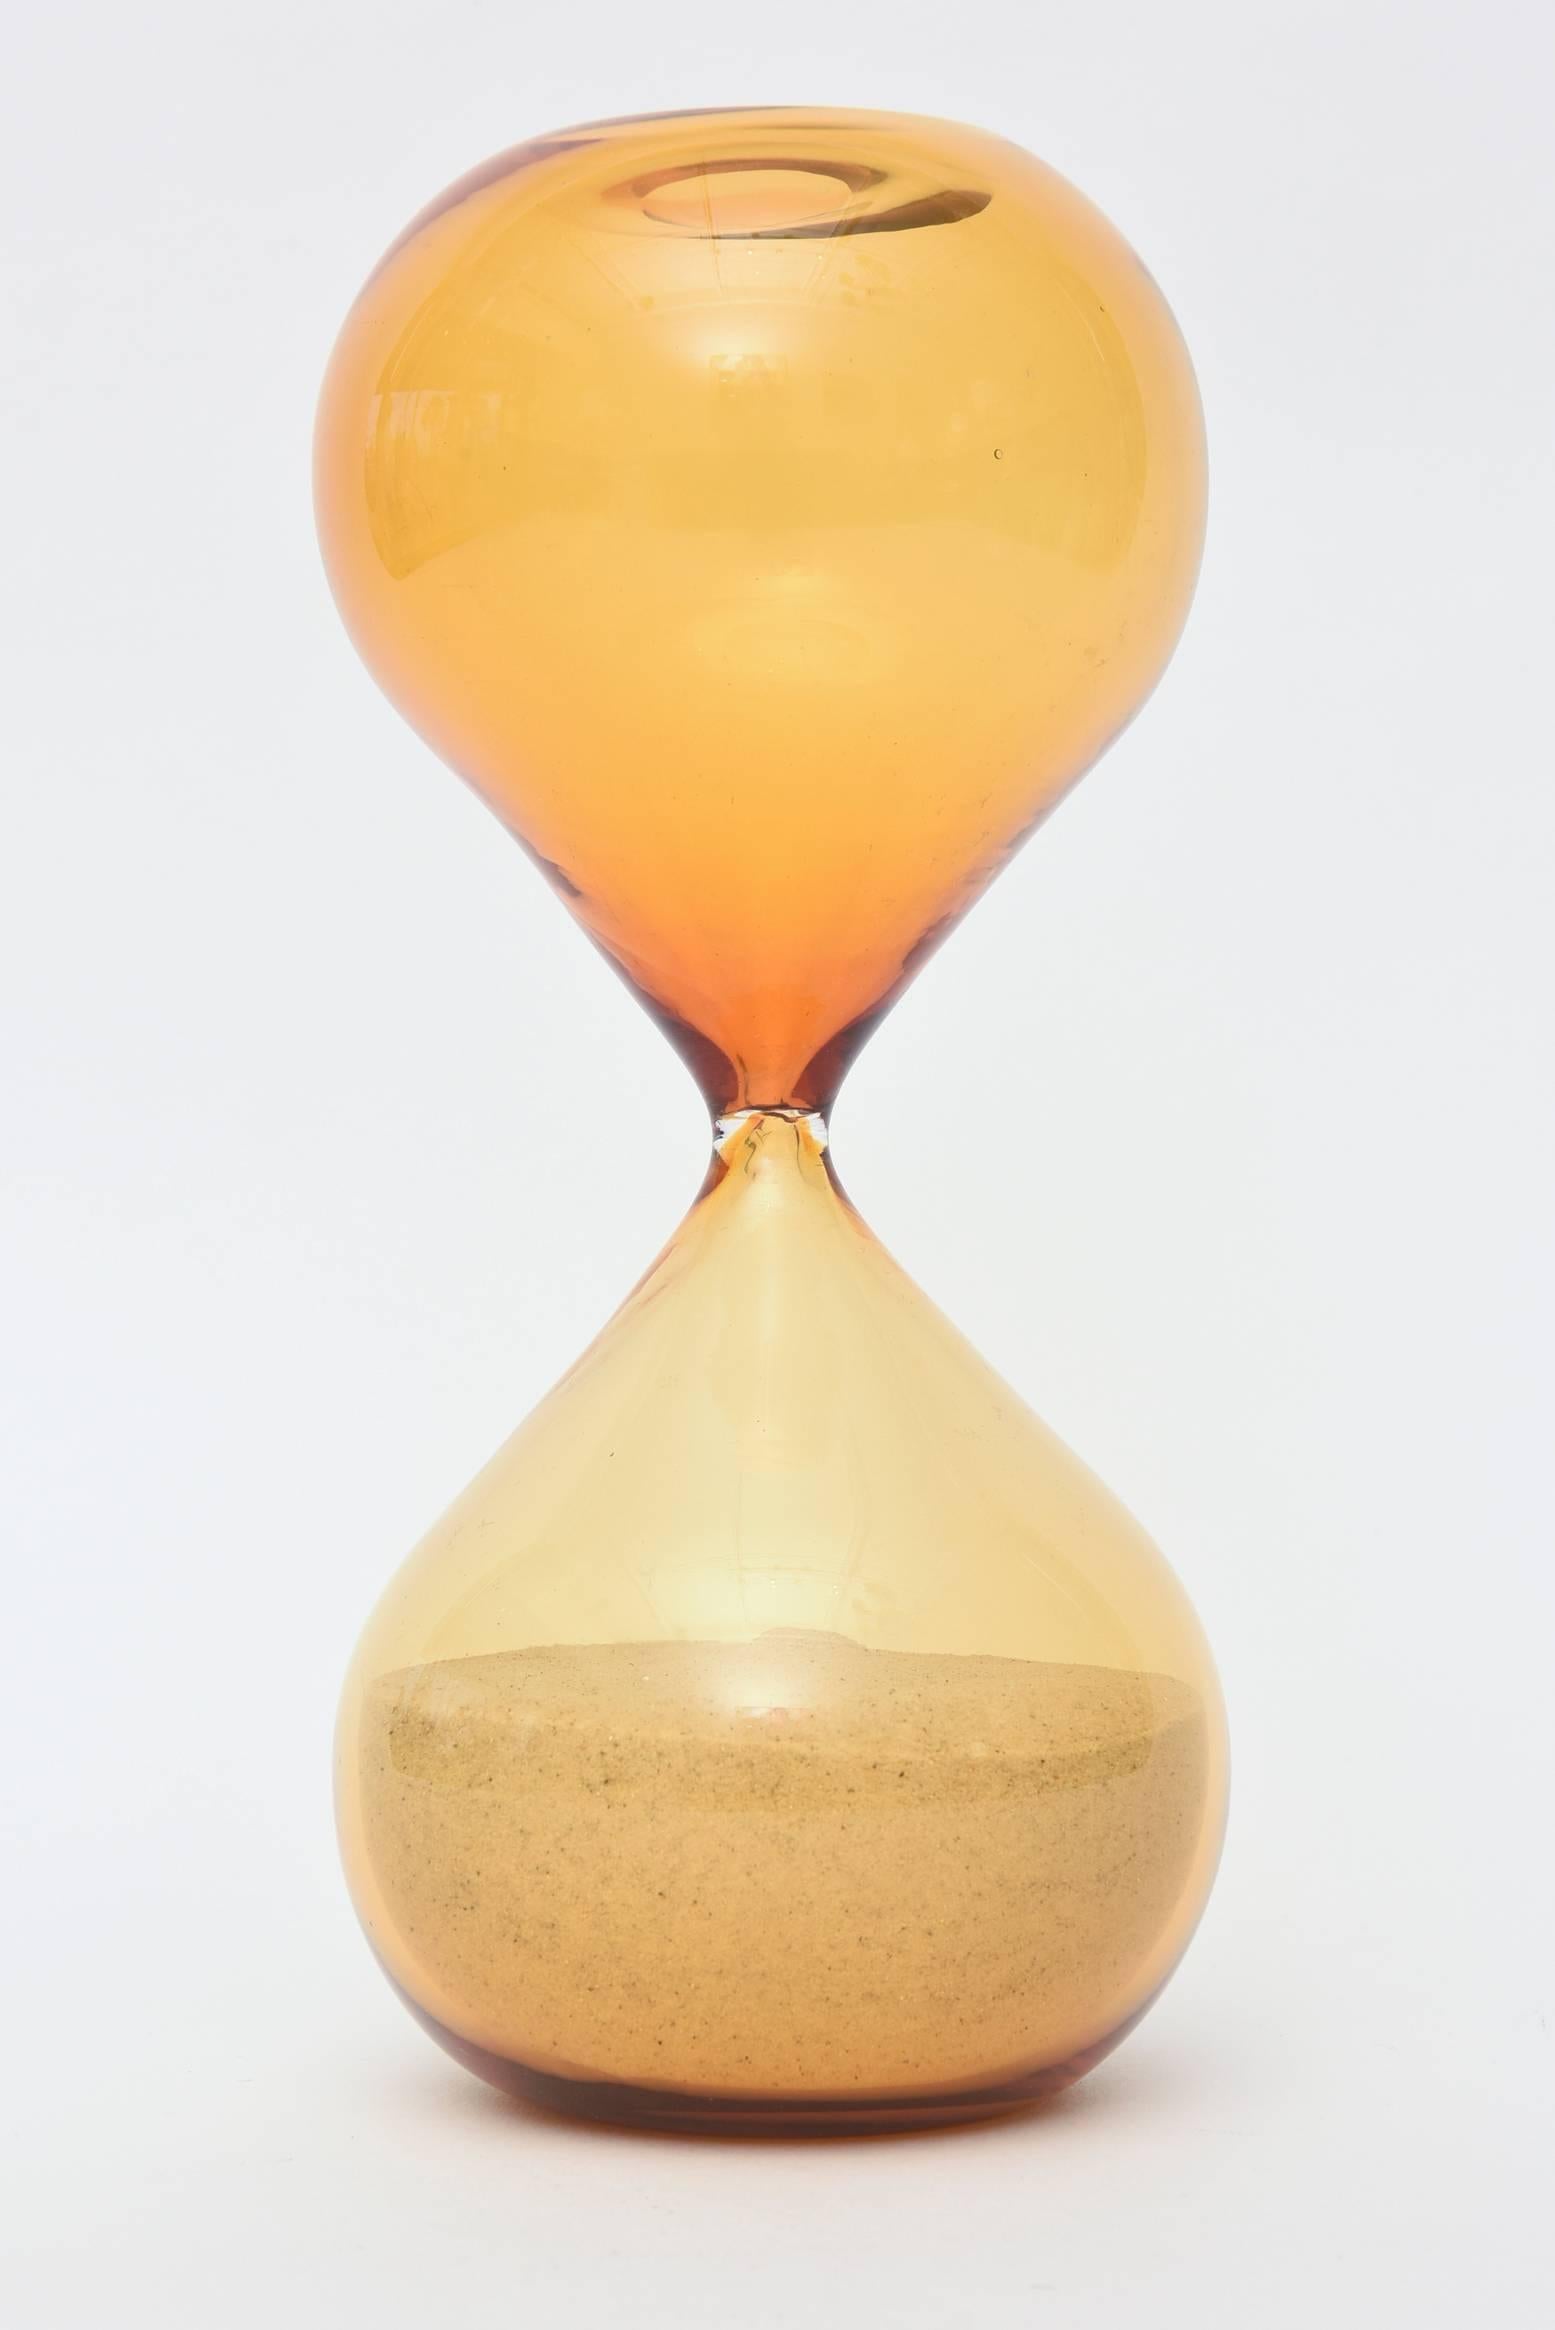 This wonderful sand hourglass sculpture is a beautiful color of amber yellow depending on the light.
It has the dimple on the bottom and this is the larger one made from 1952.
It is Venini Murano, Italian.
This is the real deal!